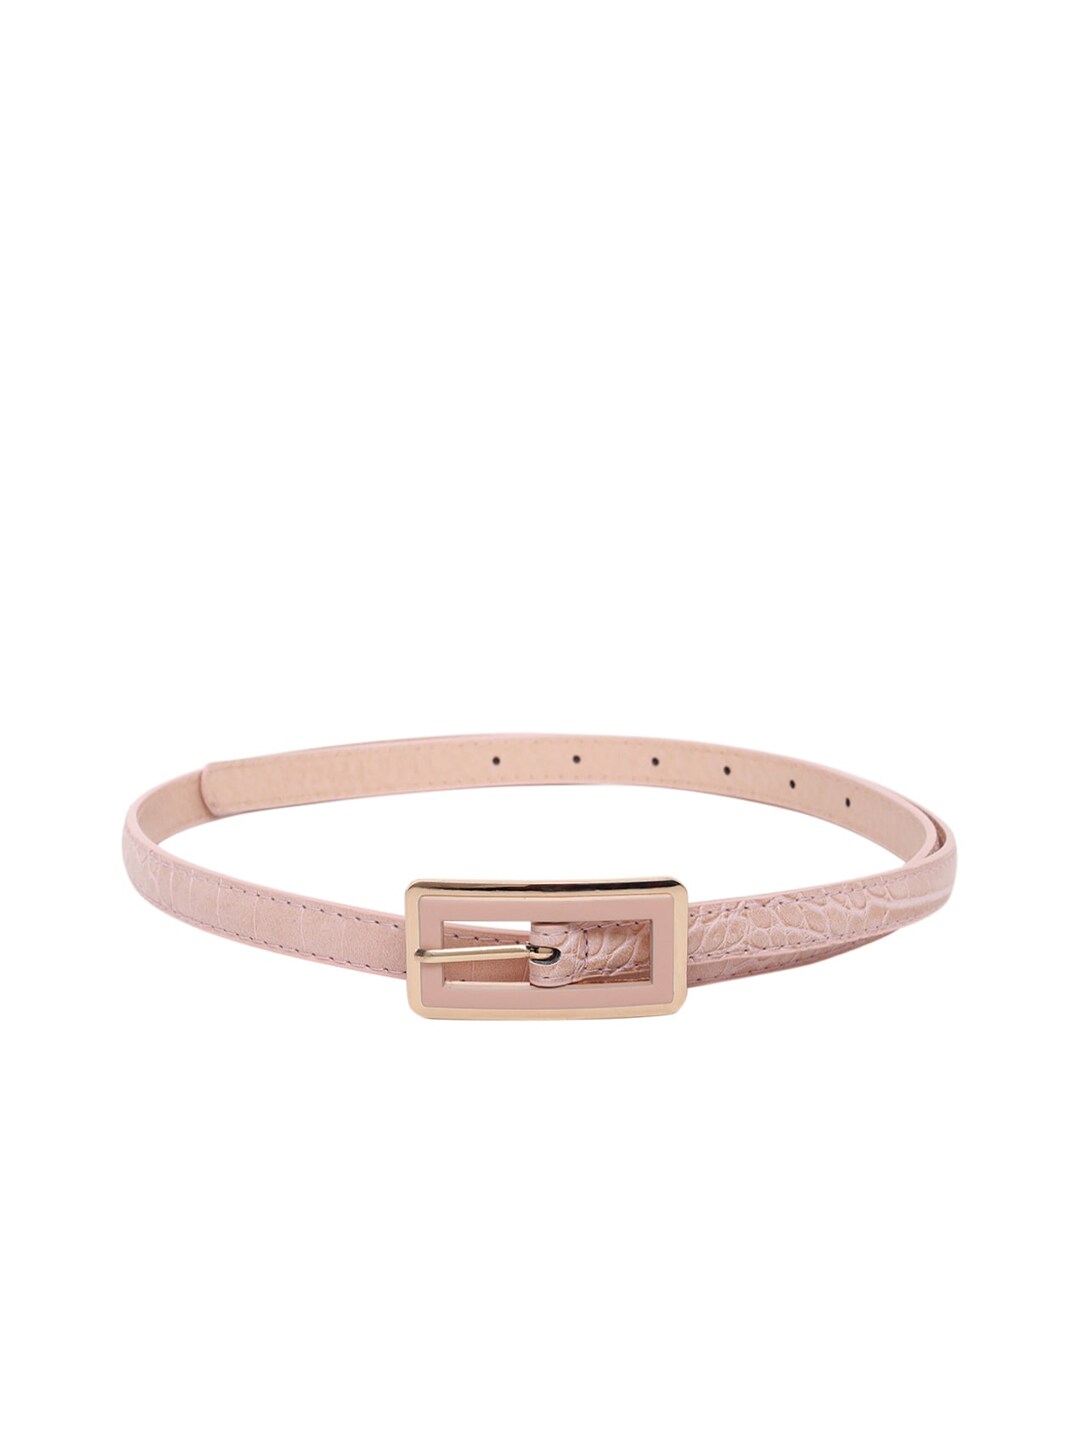 Lino Perros Women Pink Solid Belt Price in India